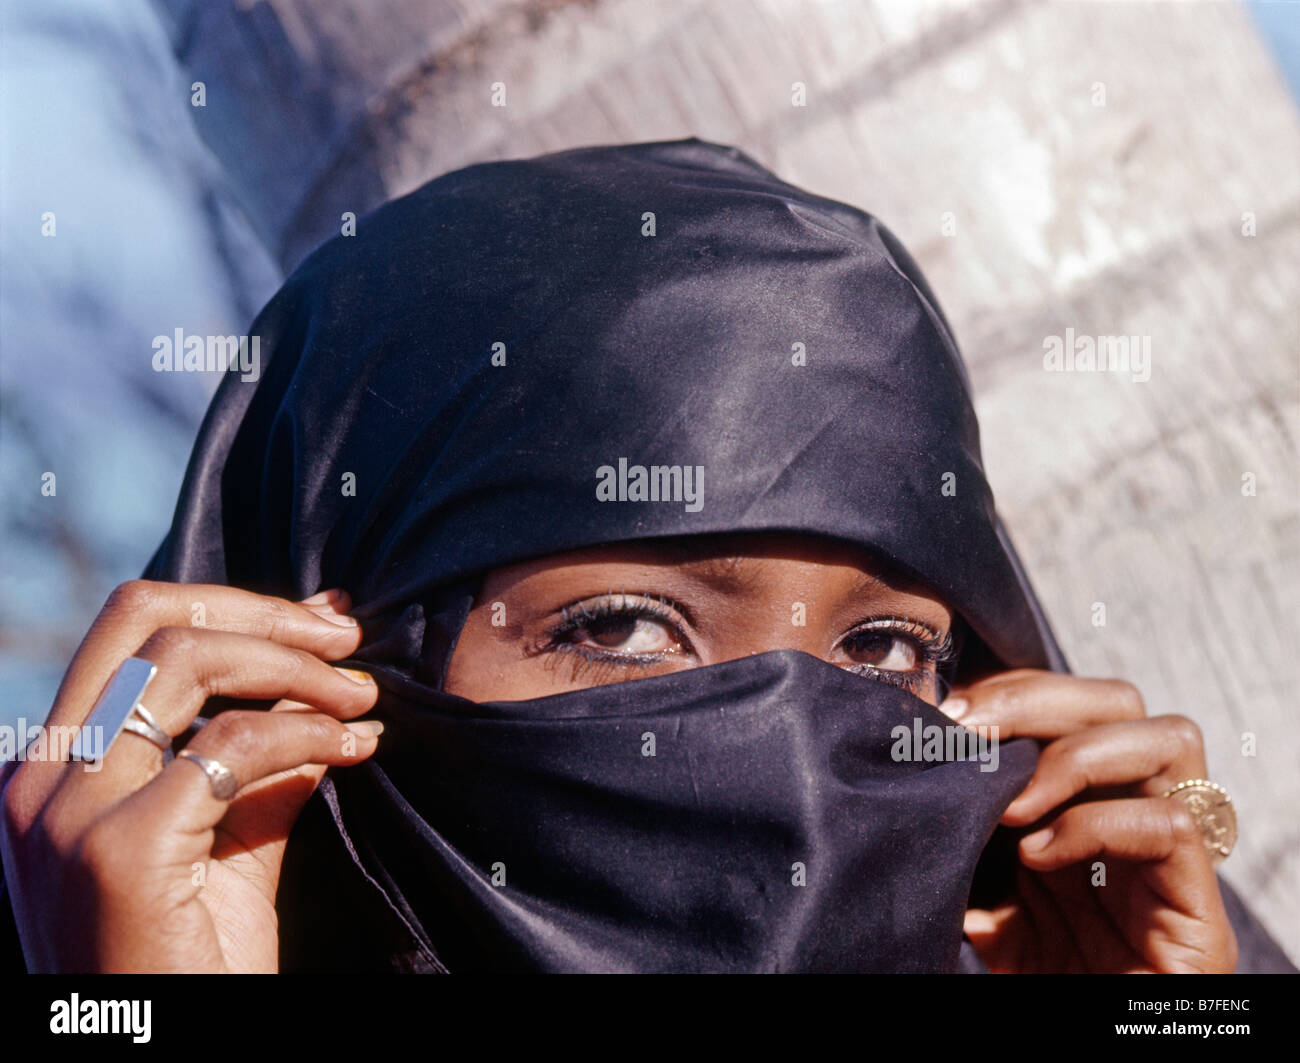 femme voilee musumane voilee Muslim woman wearing niqab comores muslim  islam islamic religion religious dress cover modest modes Stock Photo -  Alamy